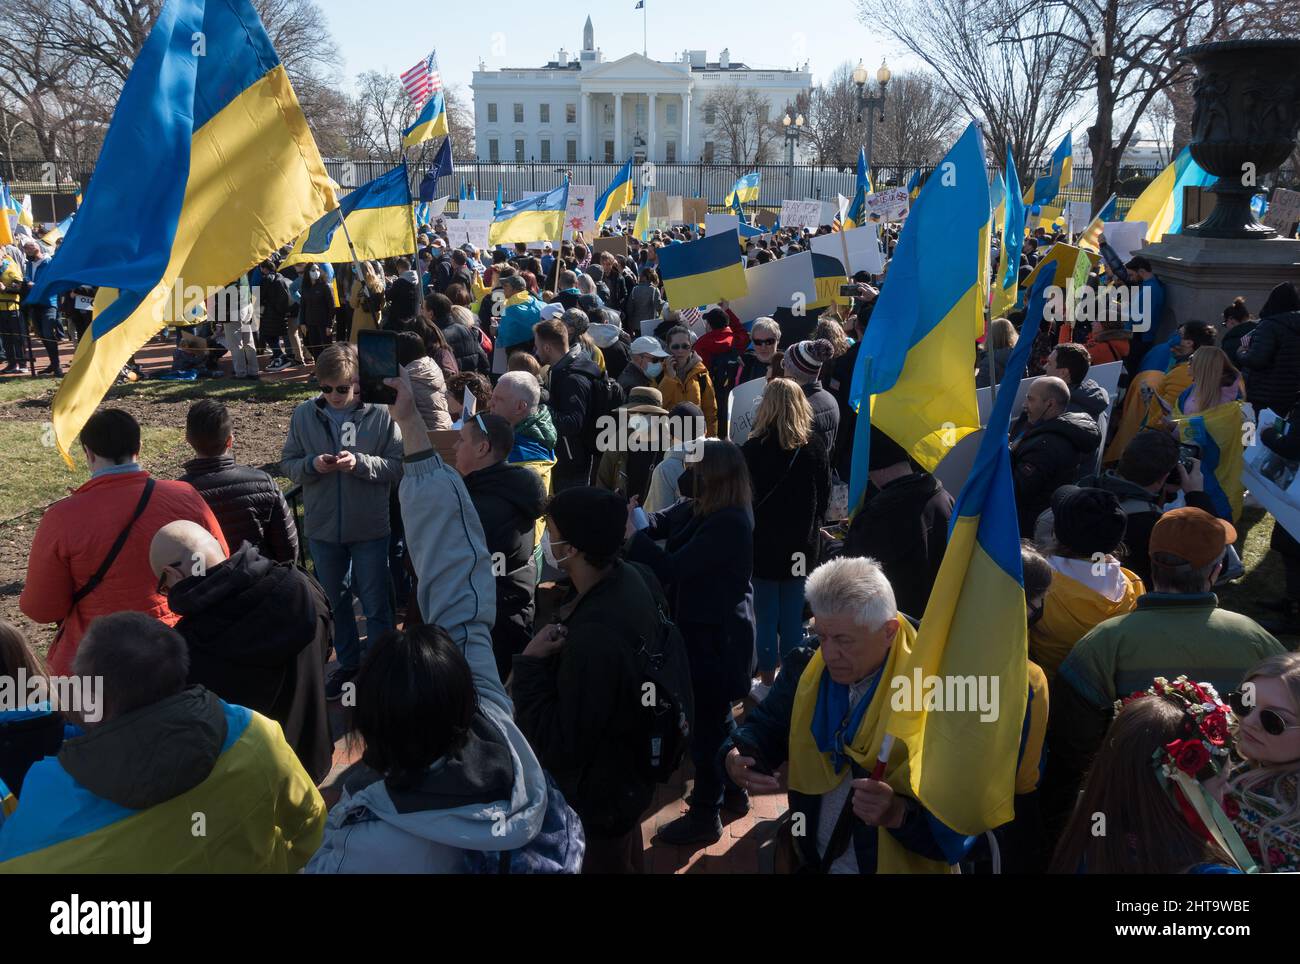 Feb. 27, 2022: Ukraine supporters rally at the White House to protest Russia’s invasion of Ukraine, and to implore President Biden and NATO to take stronger action against Vladimir Putin and Russia. Stock Photo